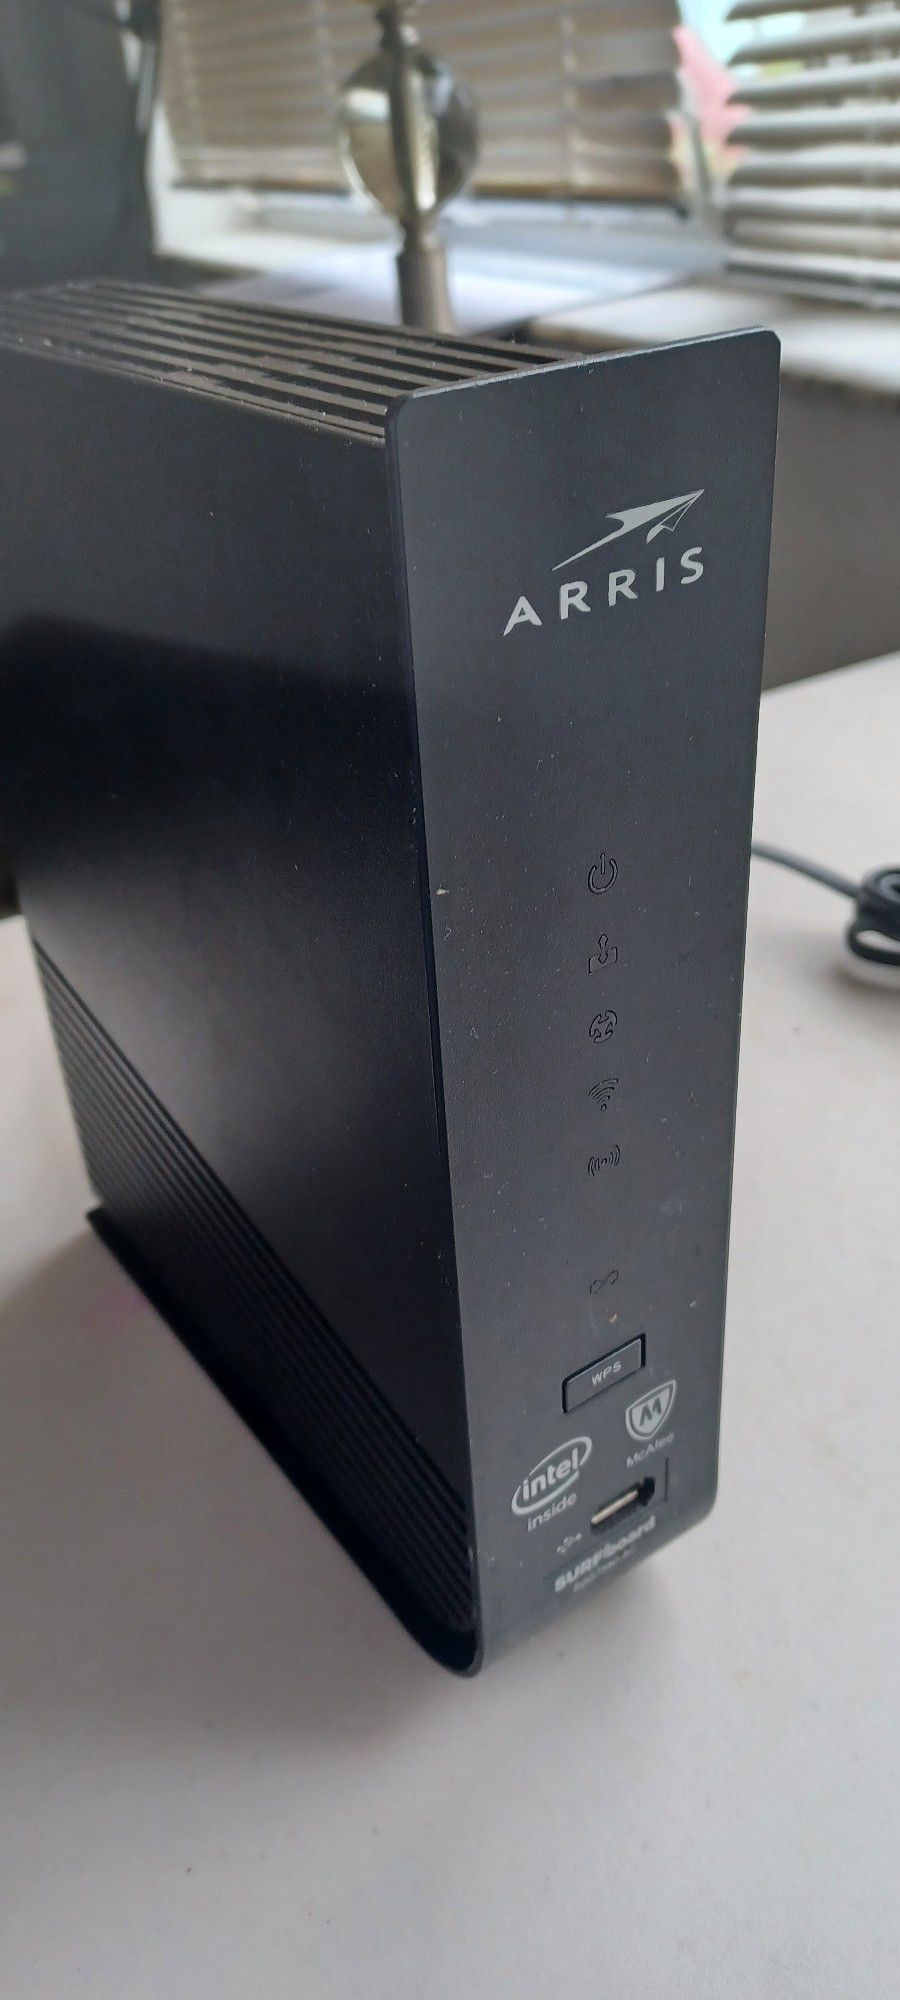 ARRIS Surfboard SBG7580AC Modem And WIFI ROUTER